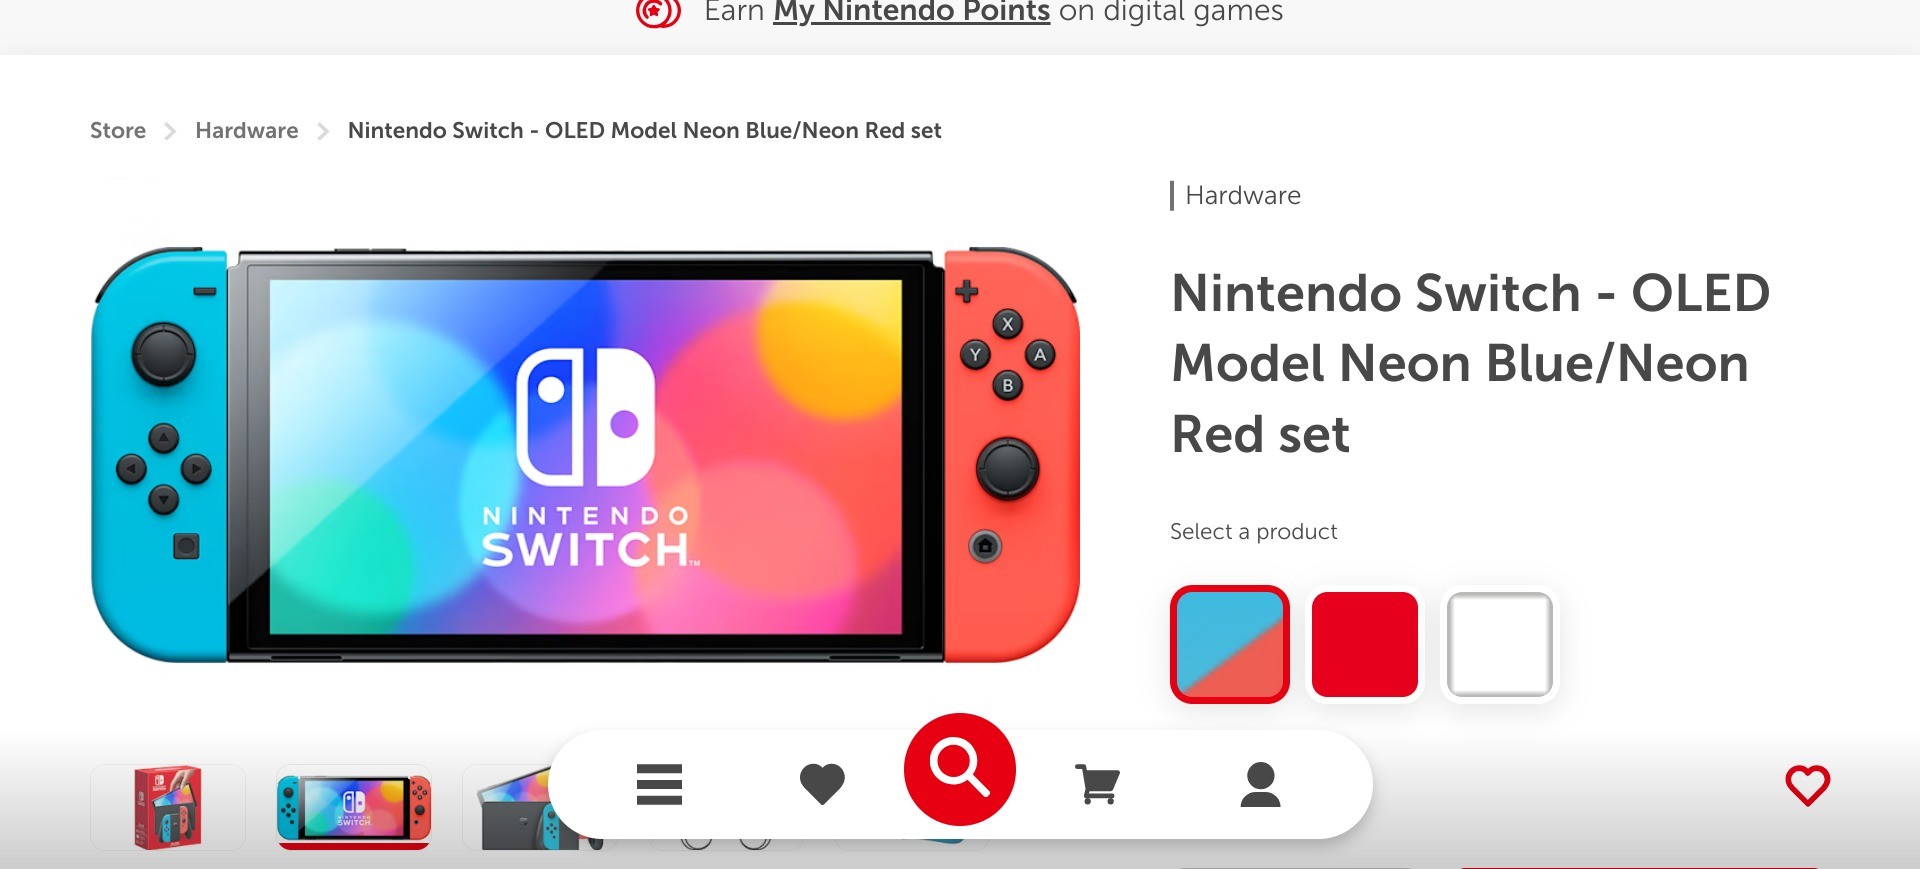 Screenshot of a Nintendo Switch product listing on nintendo.com, displaying the ™ symbol in the bottom right corner